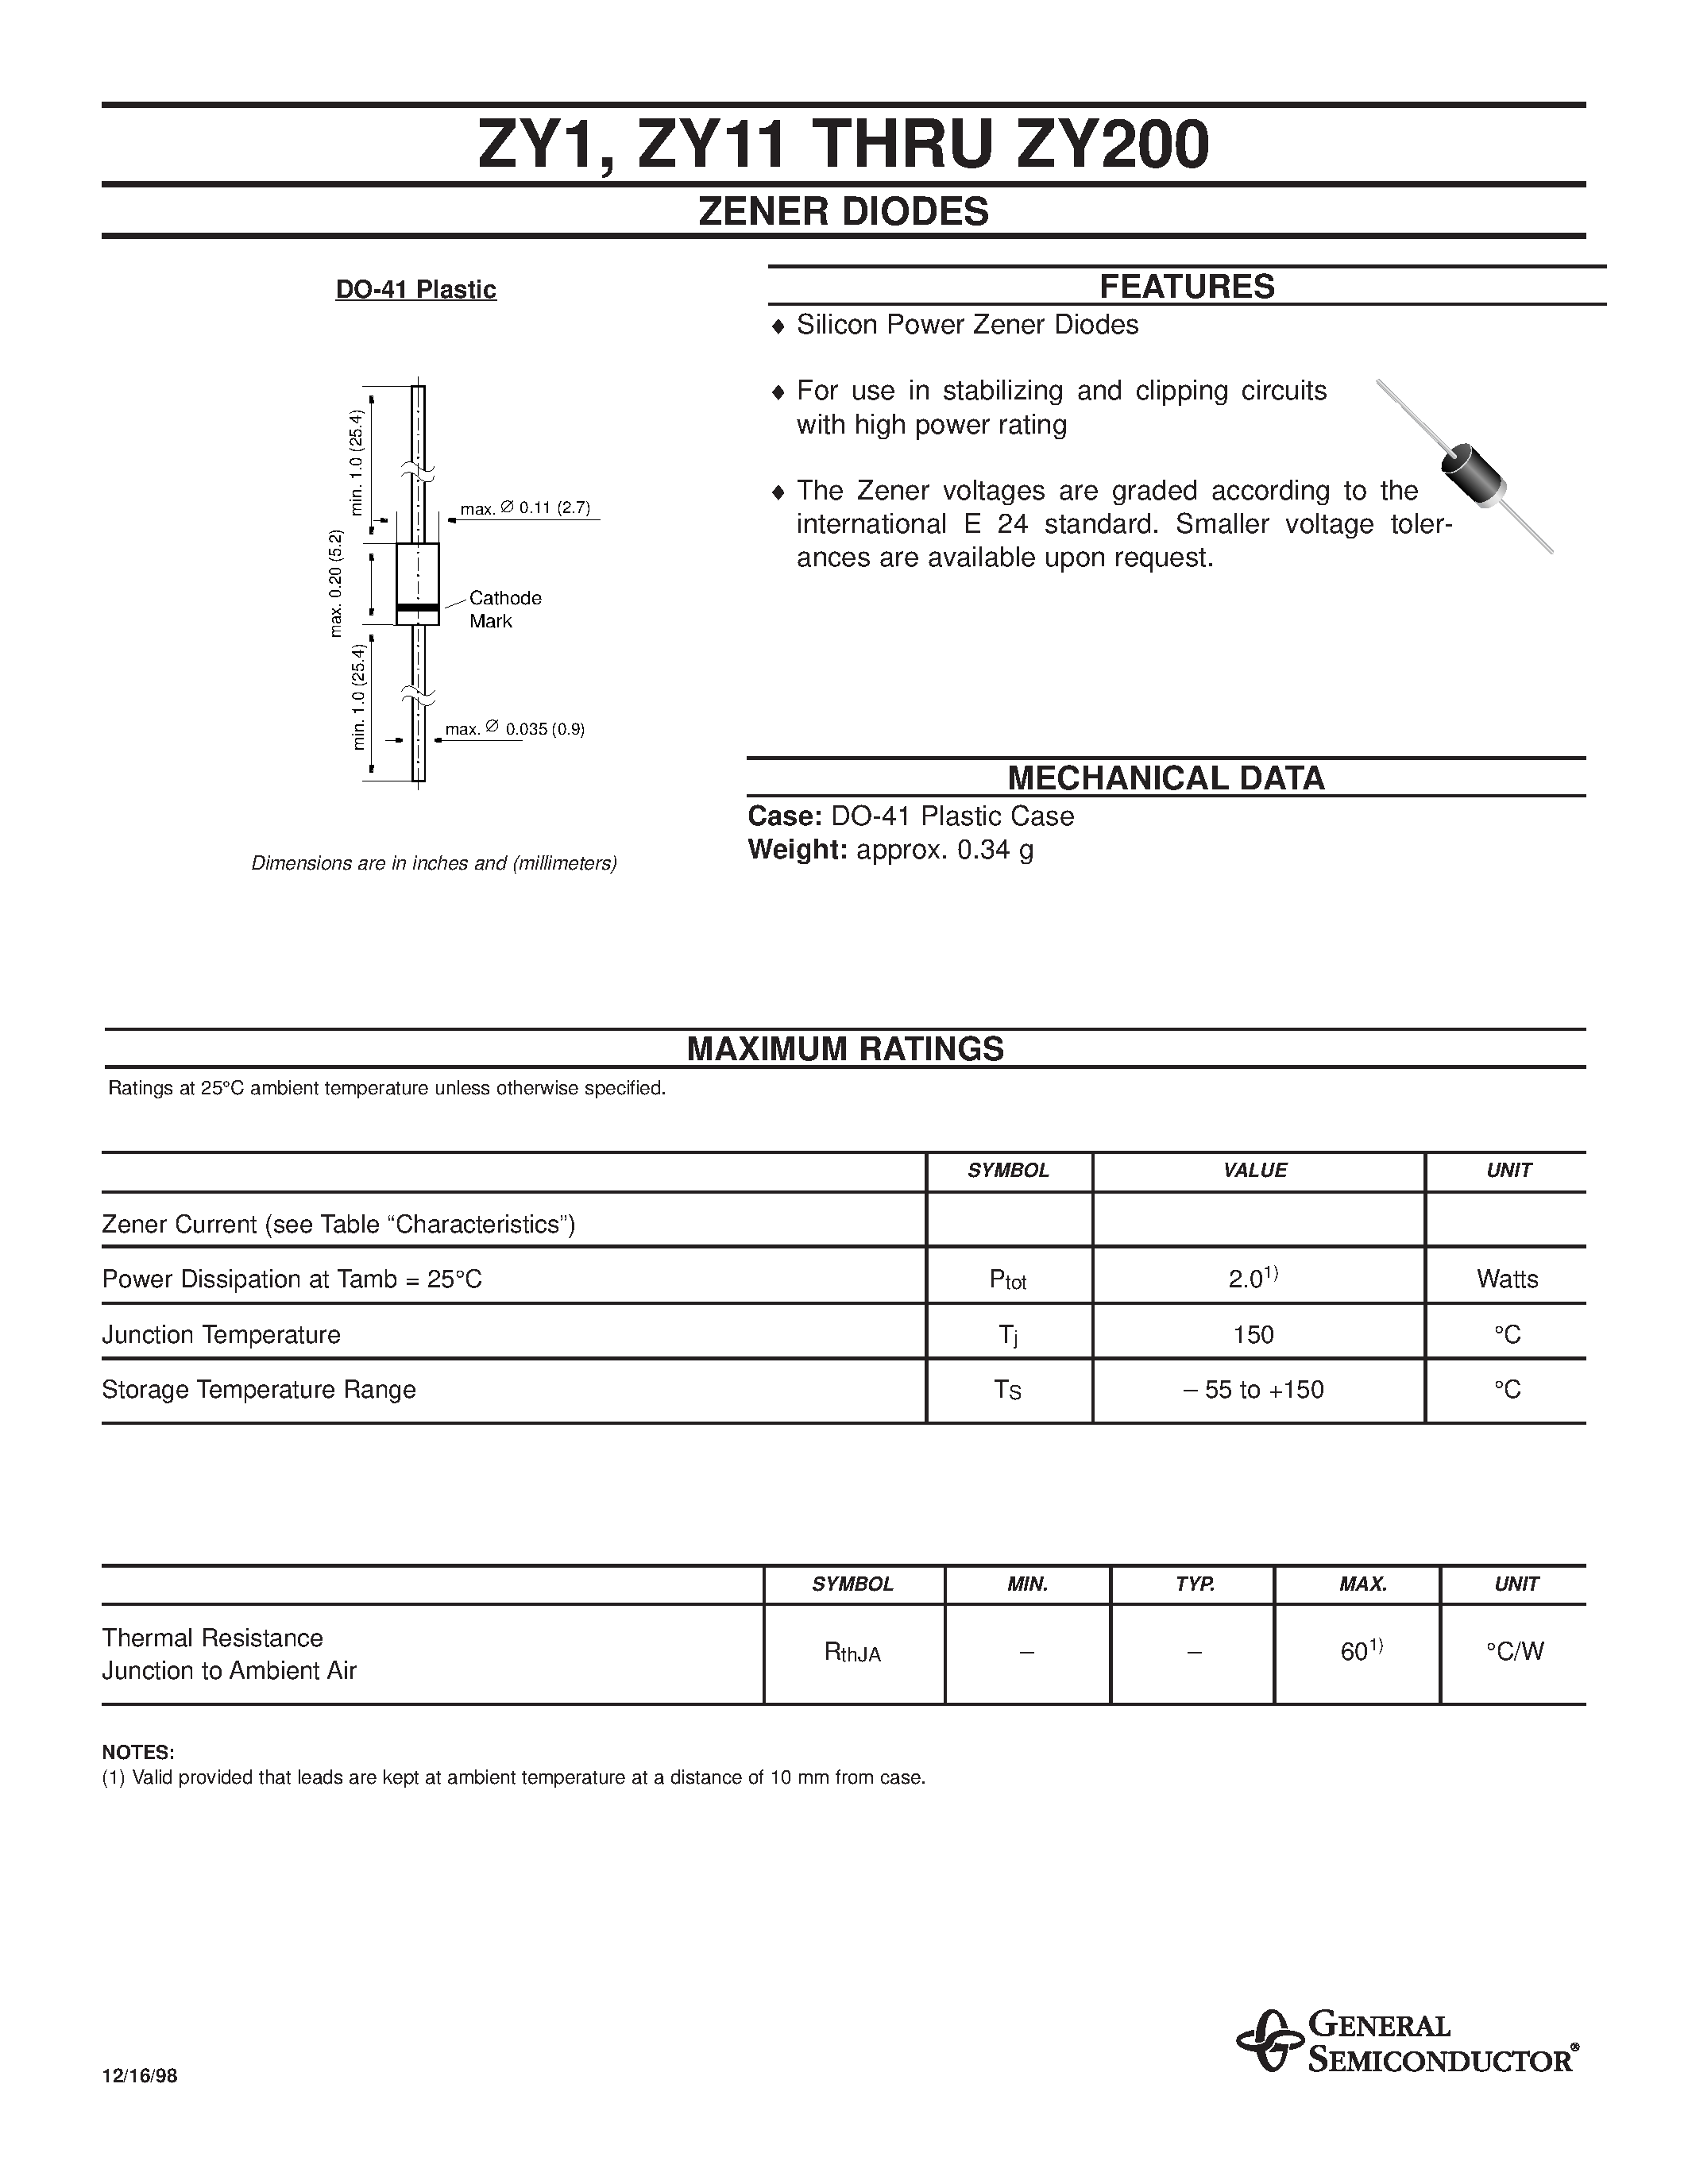 Datasheet ZY75 - ZENER DIODES page 1